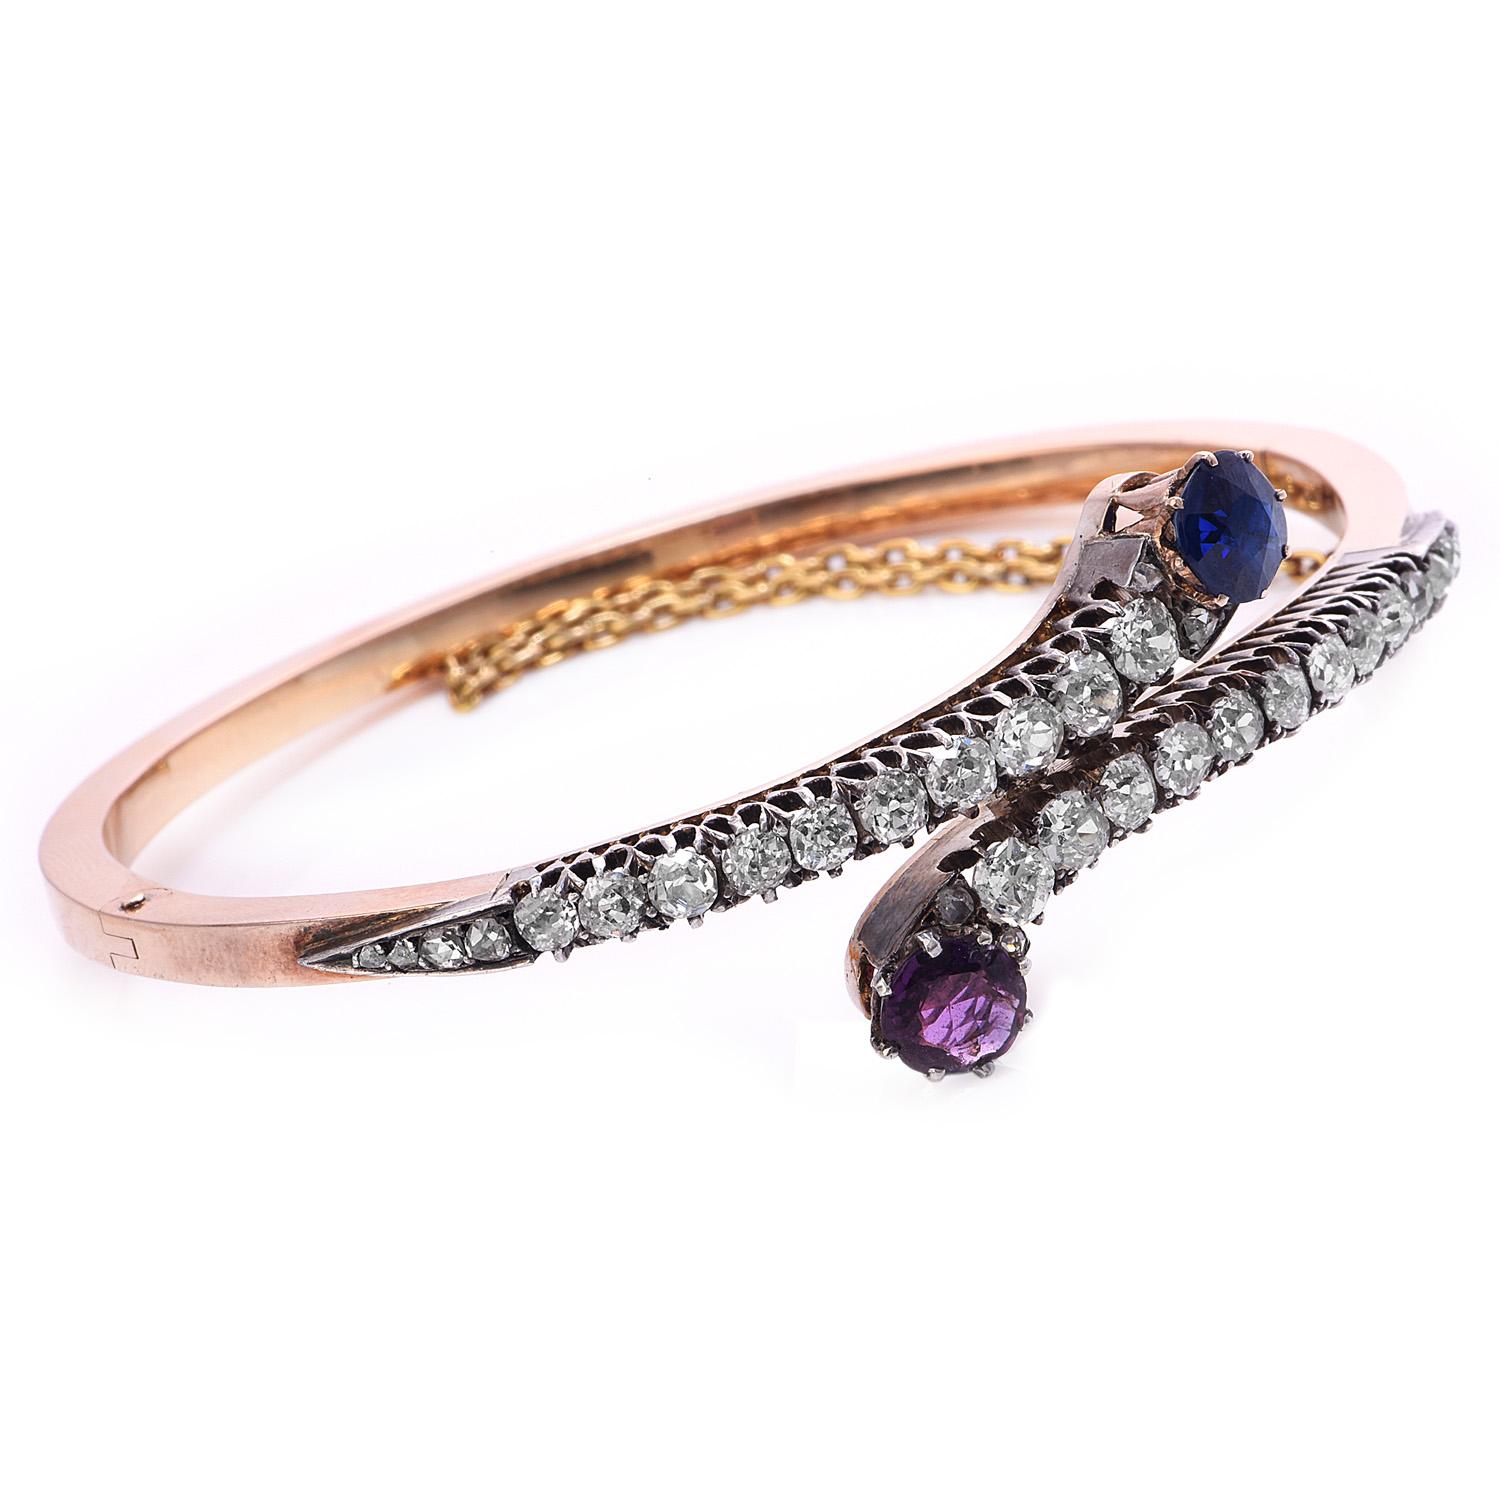 Vintage Bypass Design Vintage GIA certified Sapphire, Diamond & Ruby Bangle Bracelet,

Crafted in solid 18K rose gold, it centered with (1) square cushion-cut, prong-set, natural Ruby weighing approximately 1.00  carats & GIA certified No Heat Blue